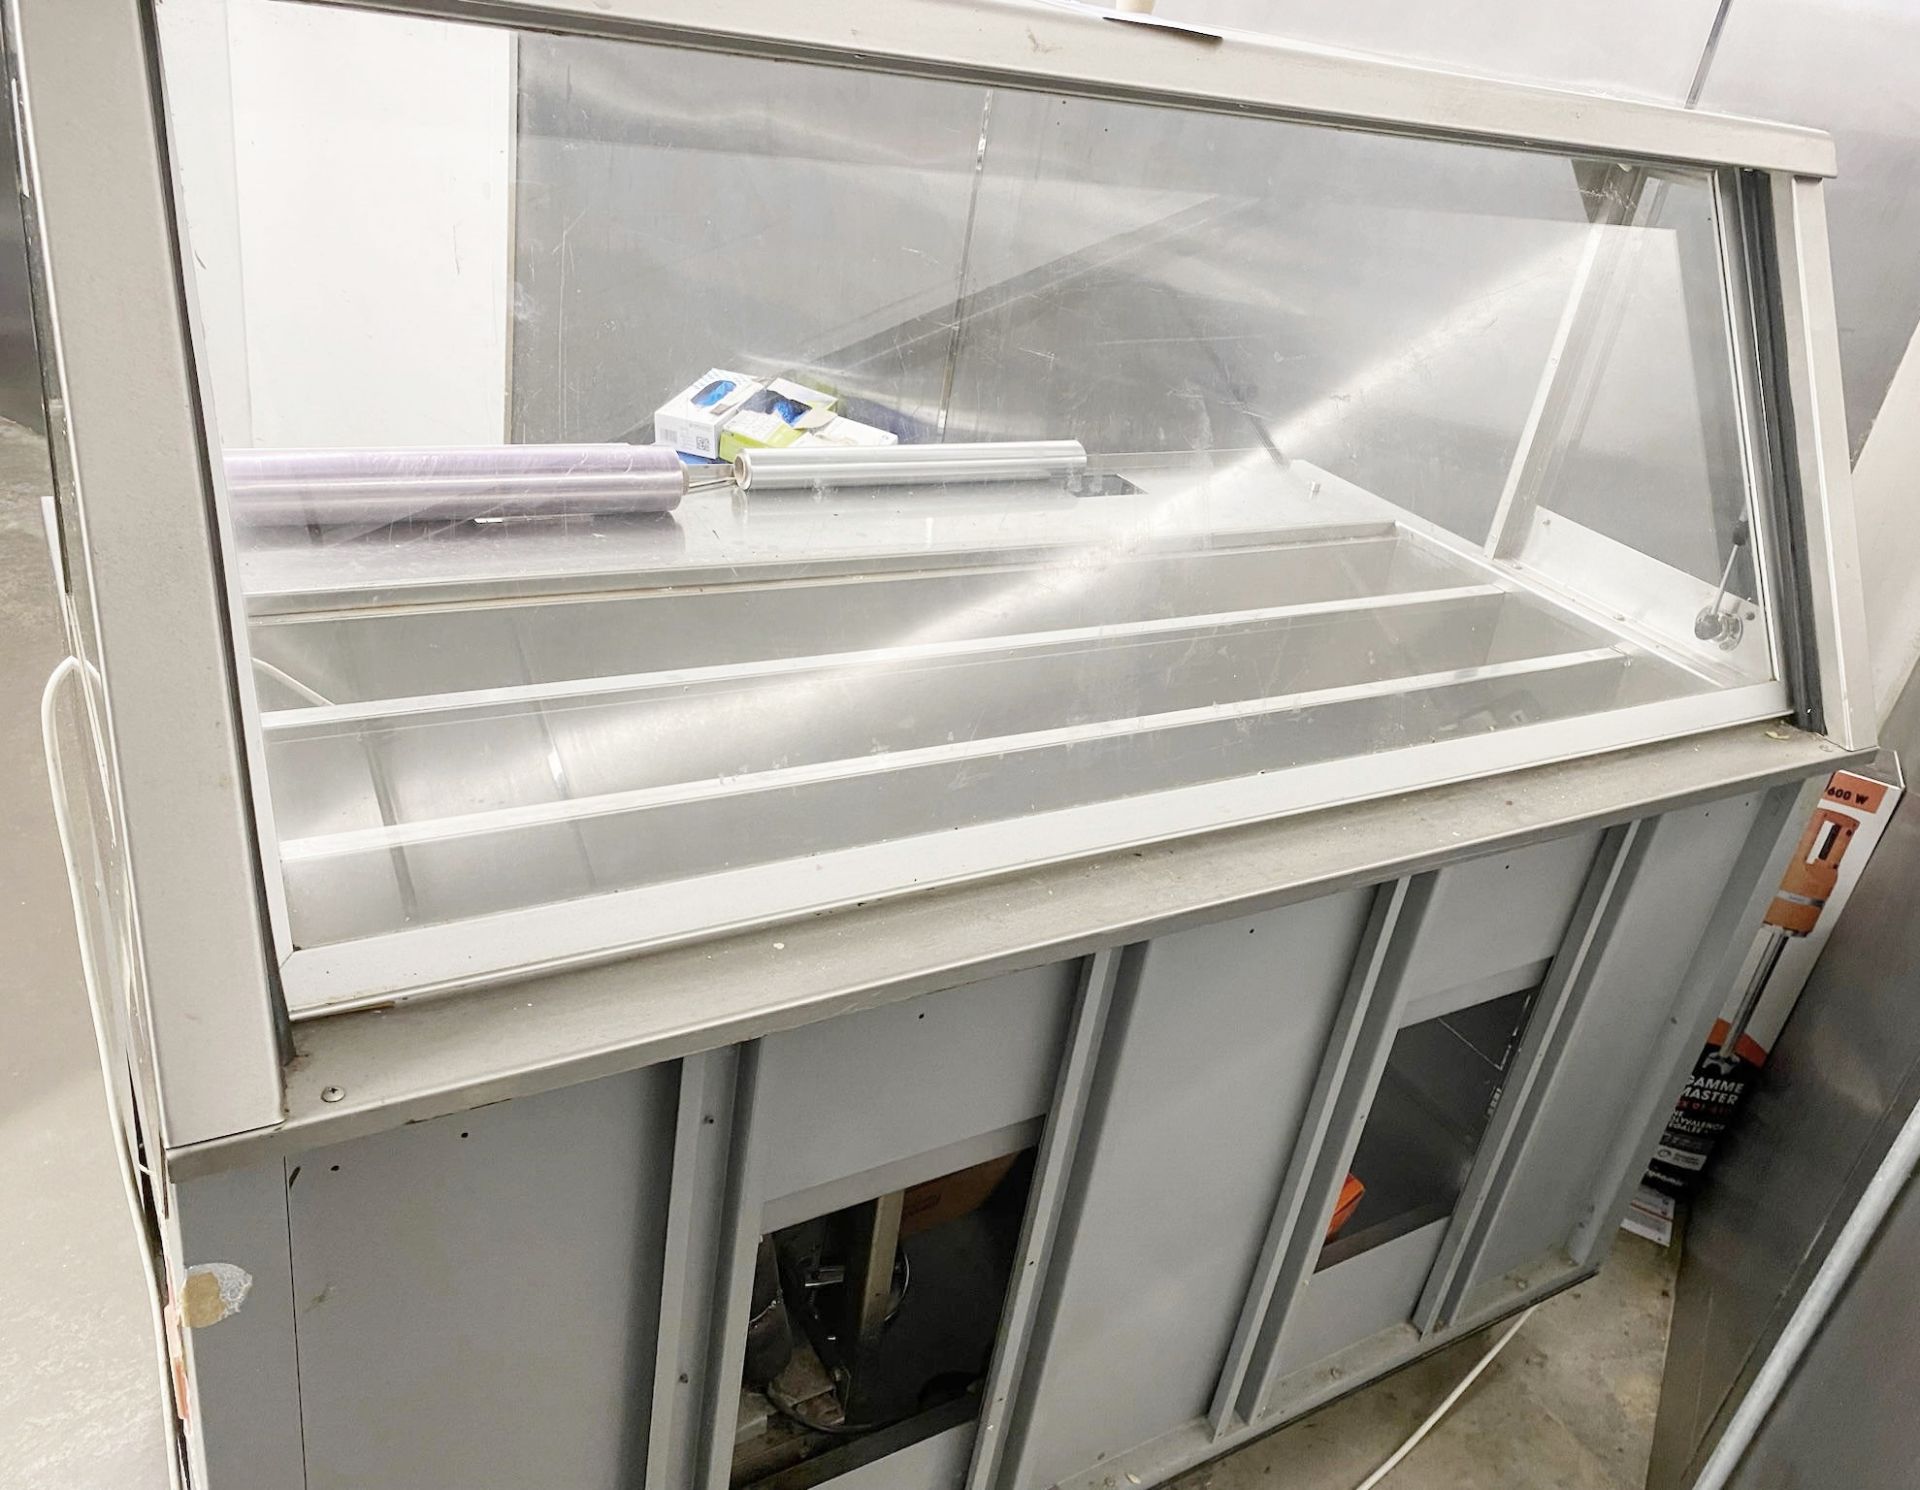 1 x Duke SWD600-60FL M Refrigerated Sandwich Prep Line With Slanted Glass Screen - As Used in Subway - Image 5 of 10